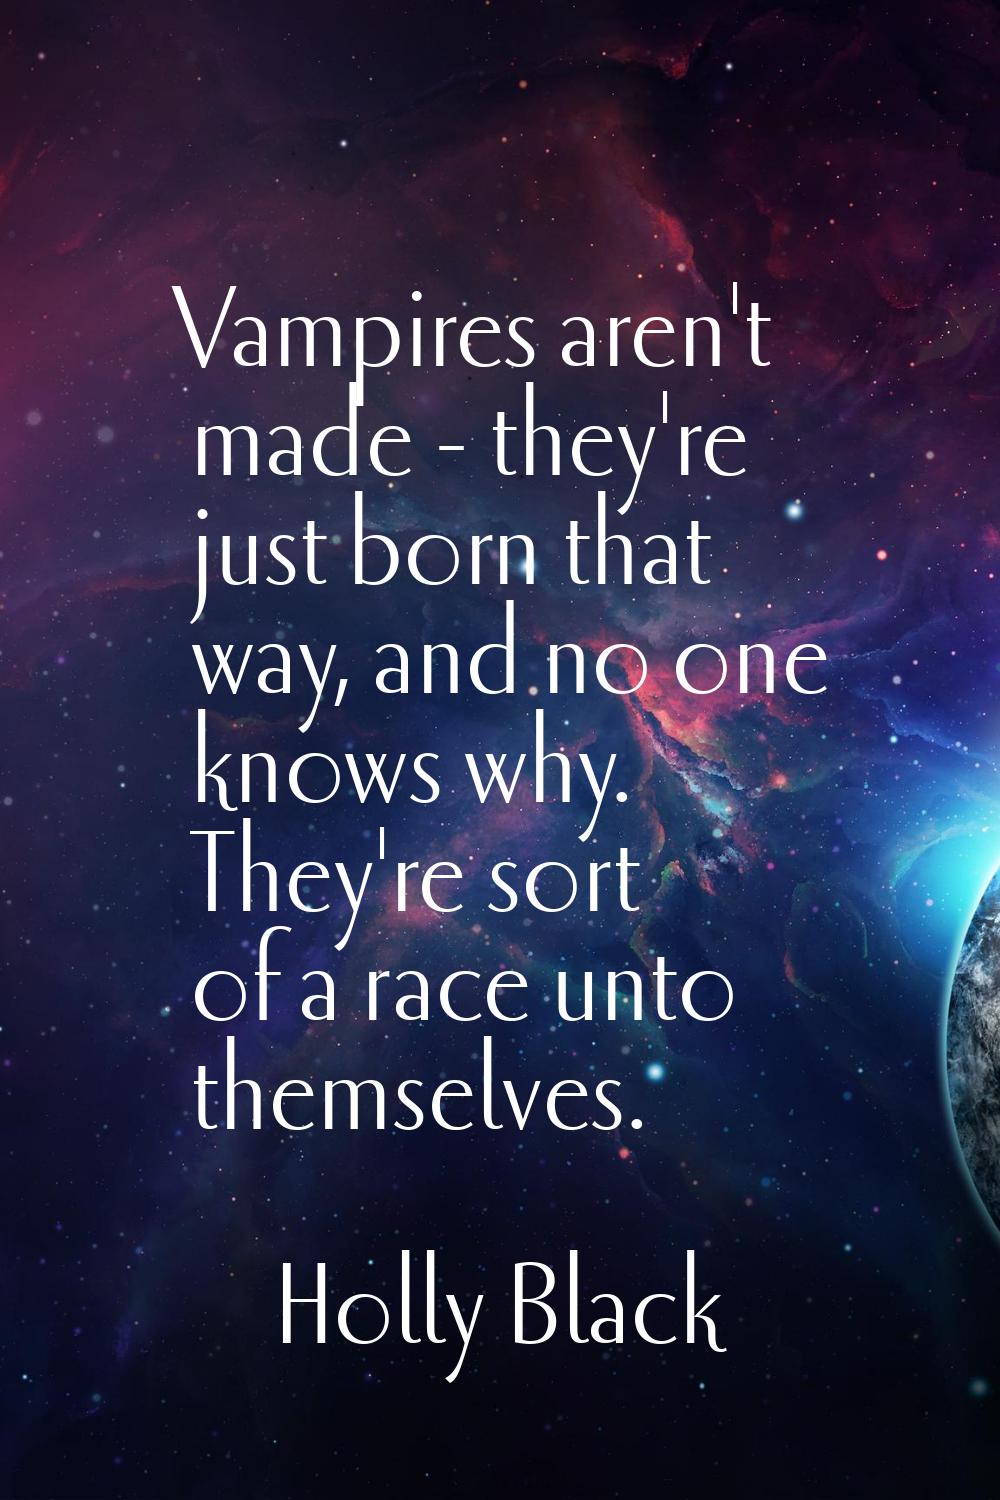 Vampires aren't made - they're just born that way, and no one knows why. They're sort of a race unt